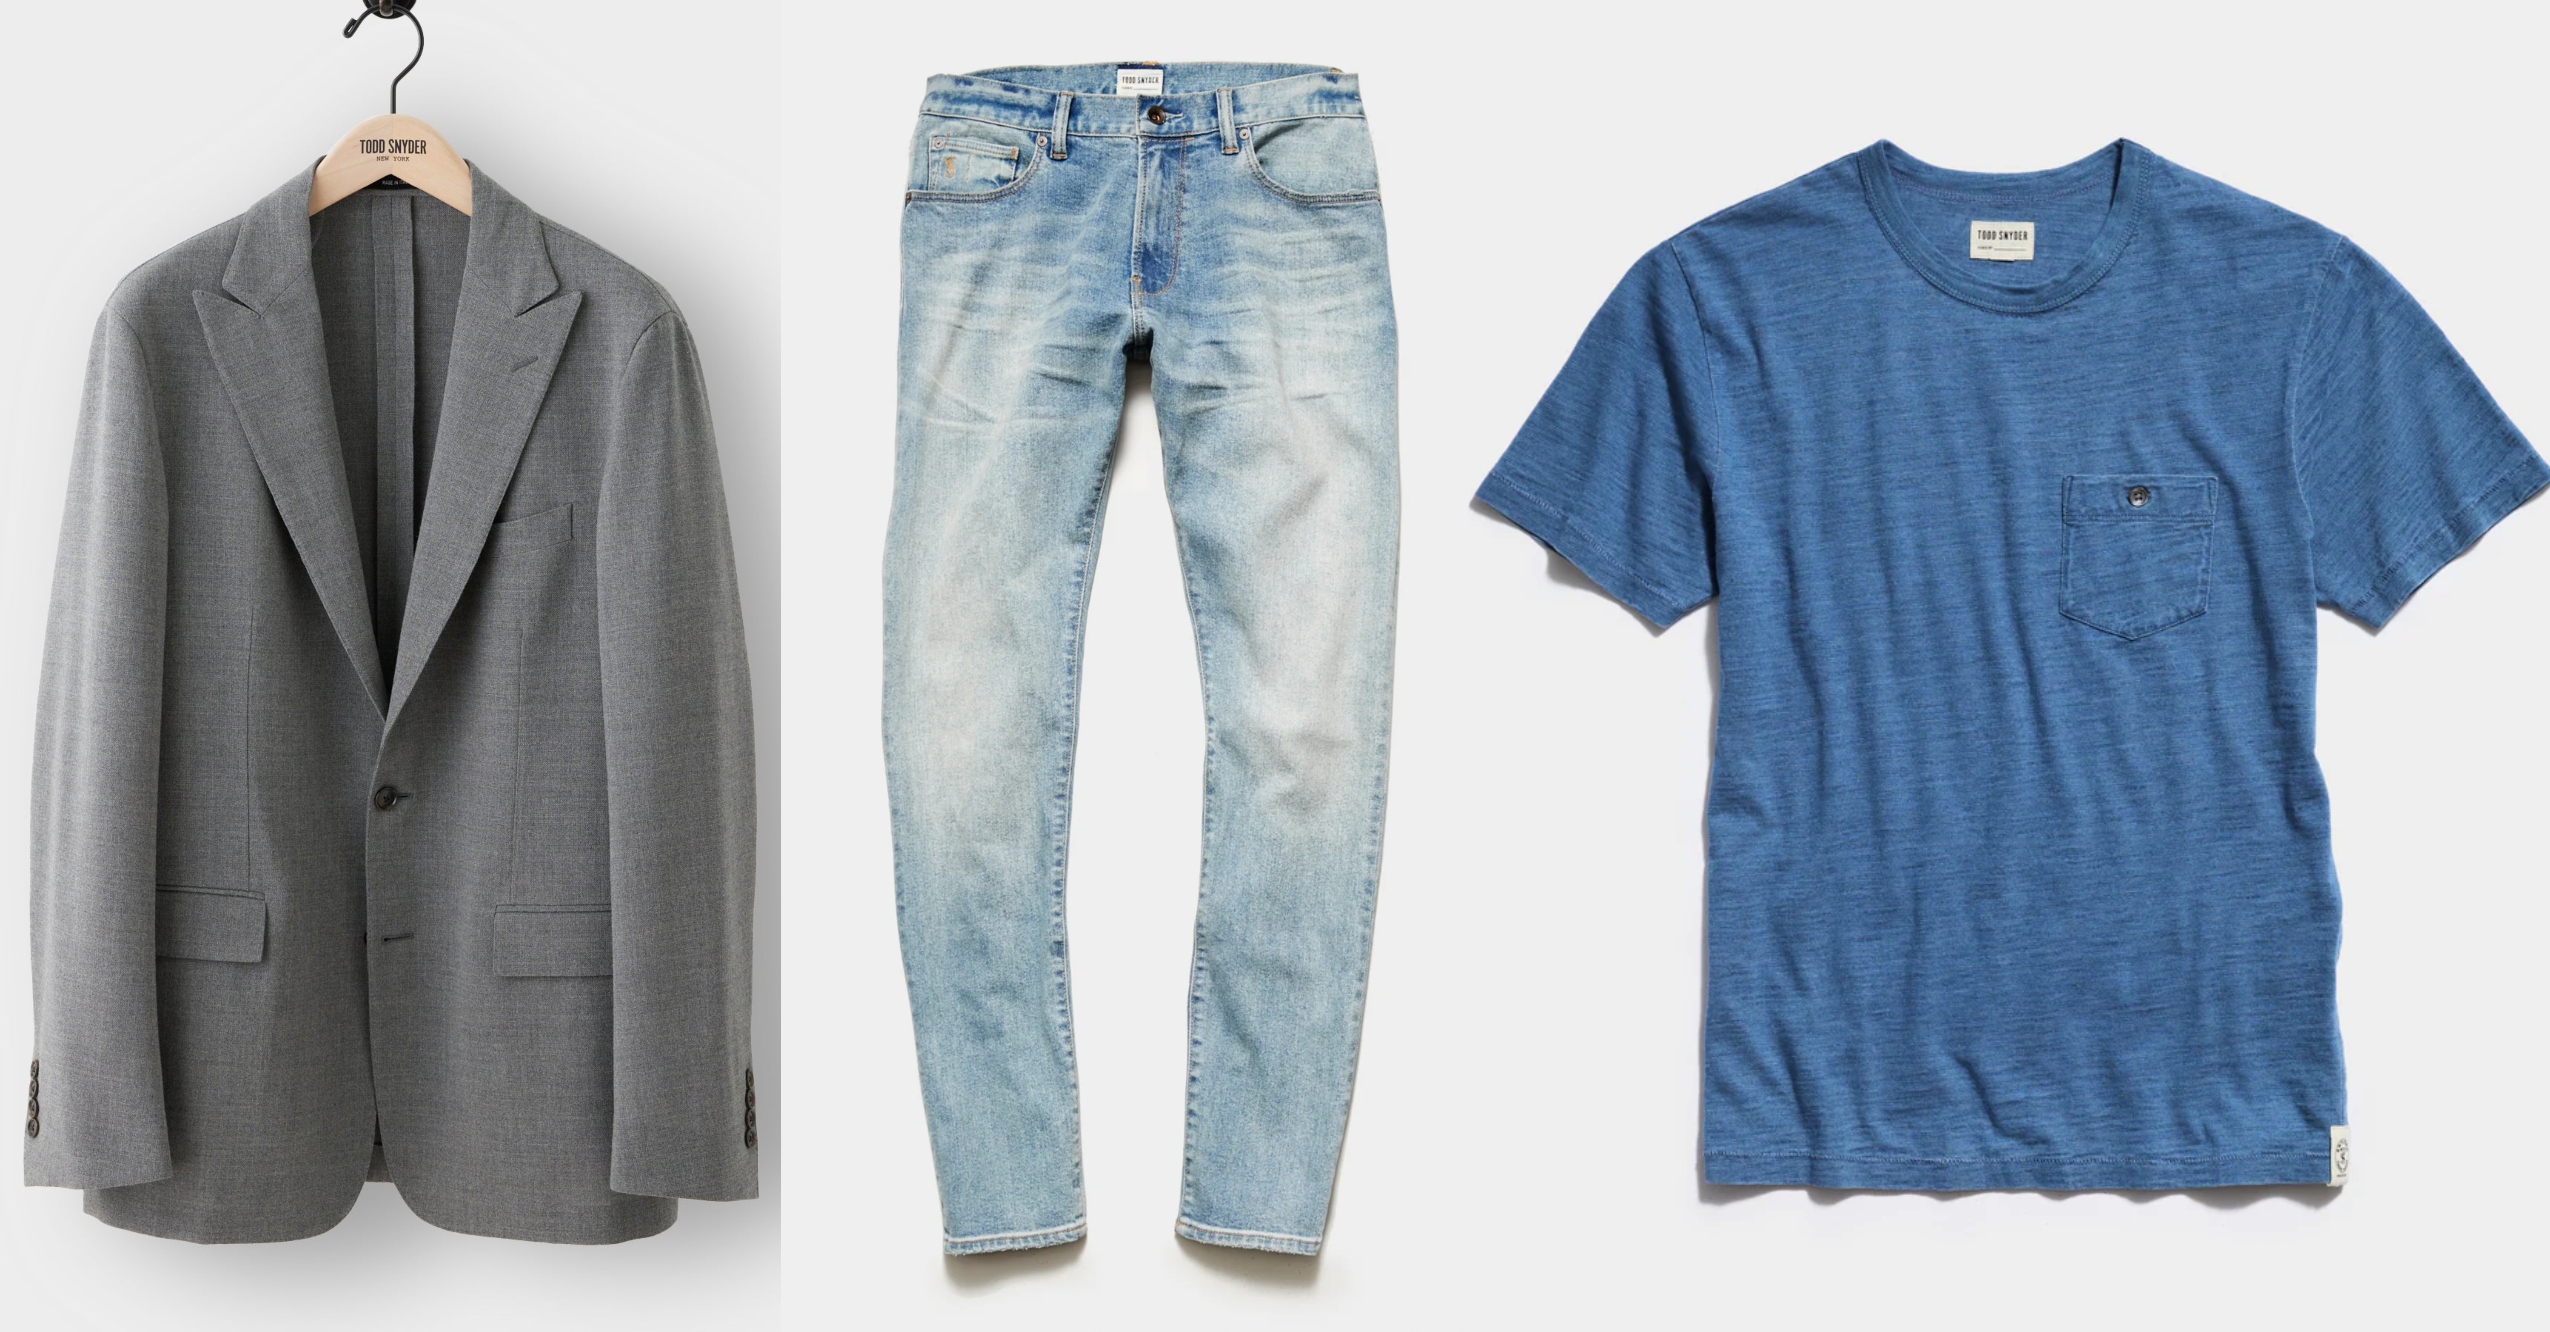 Todd Snyder Spring Sale: Shop These Stylish Menswear Deals